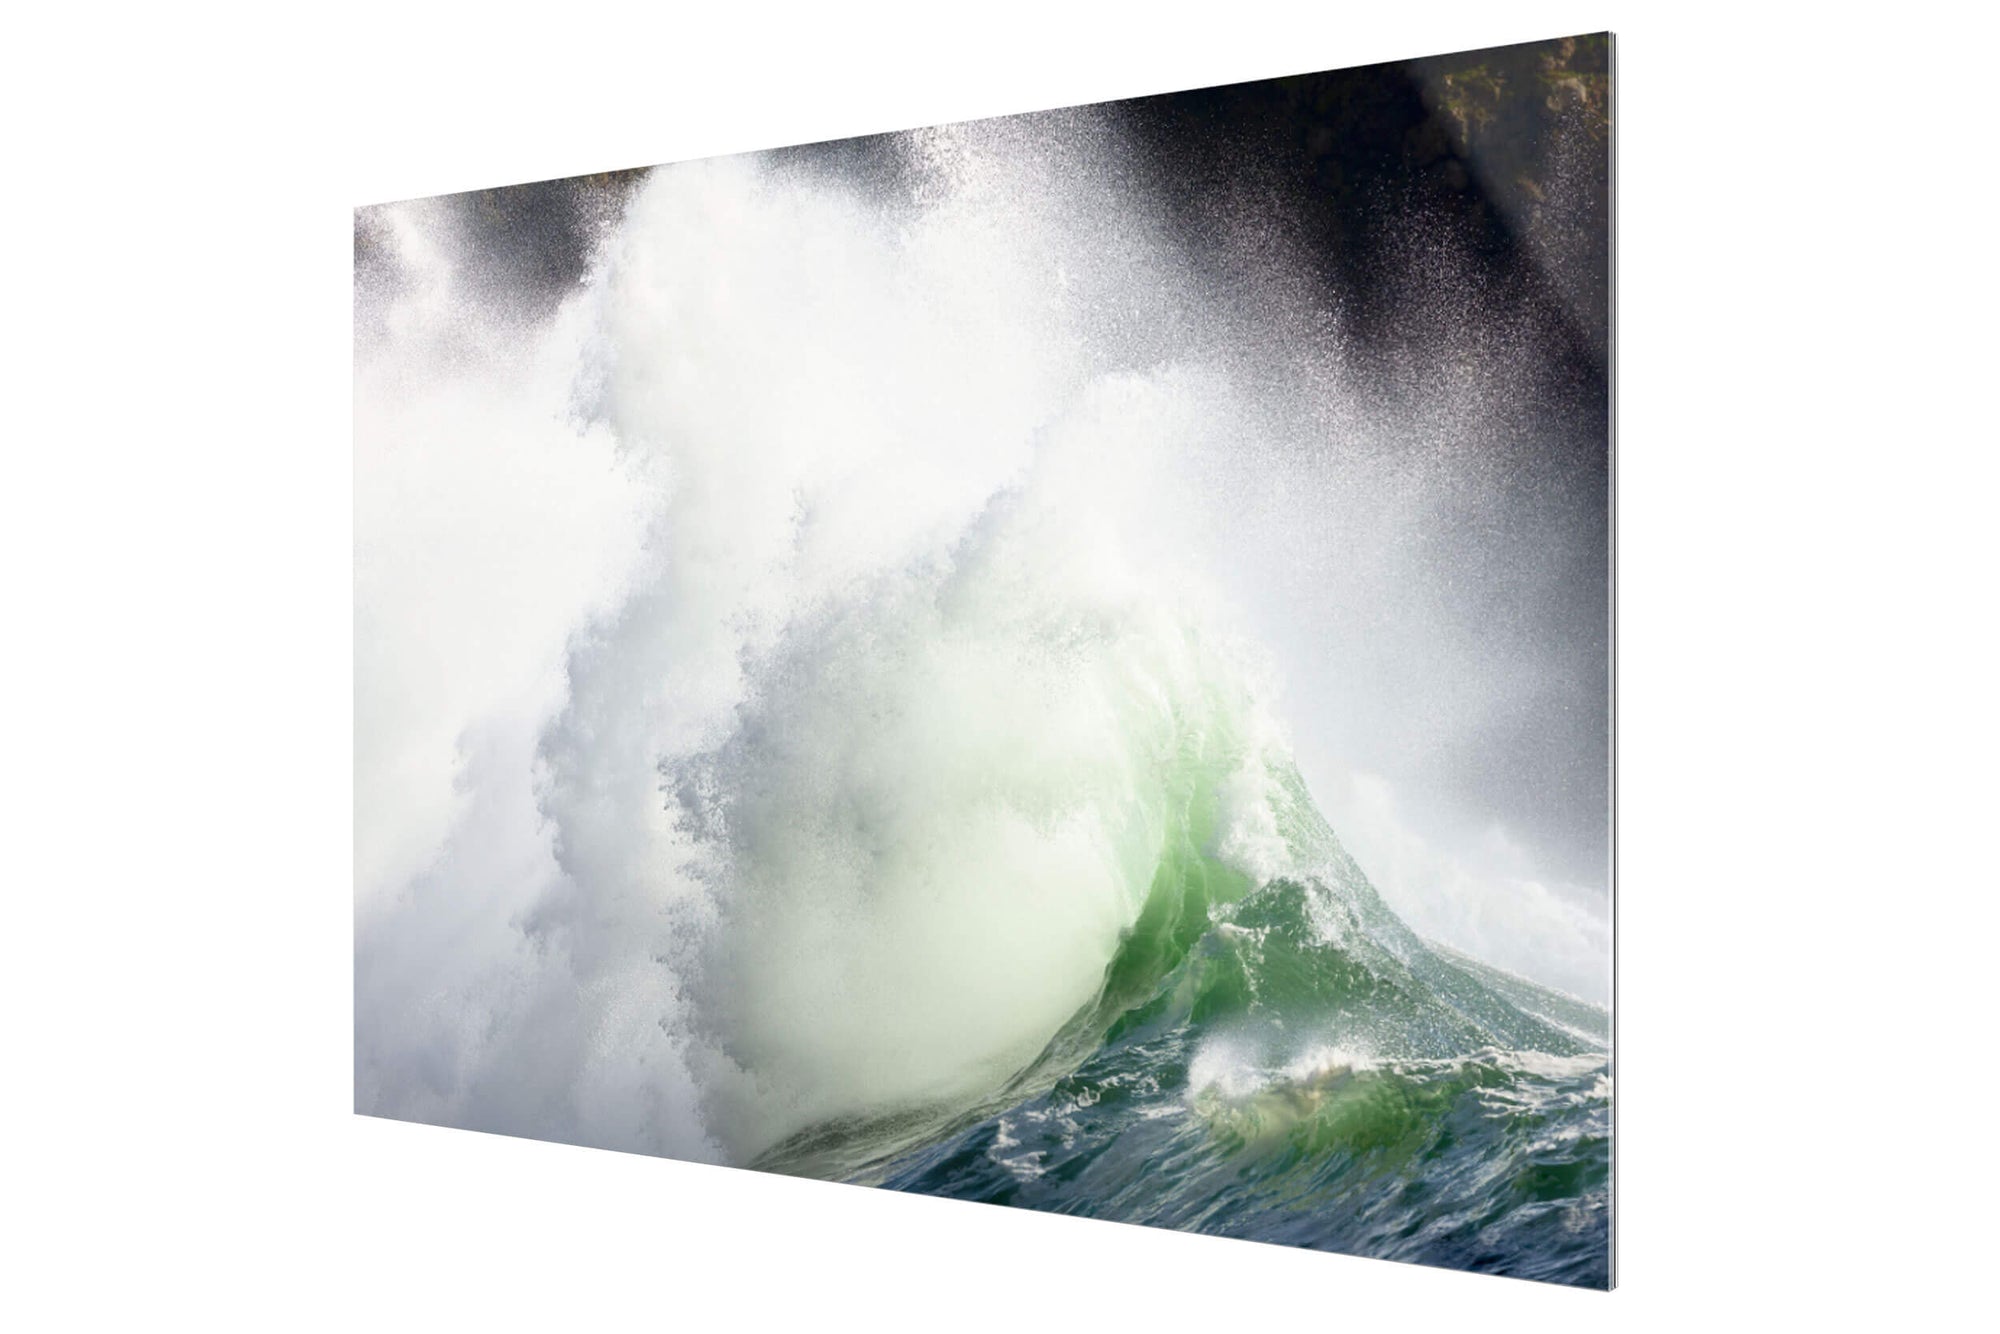 A piece of TruLife acrylic Washington art shows the waves at Cape Disappointment State Park.